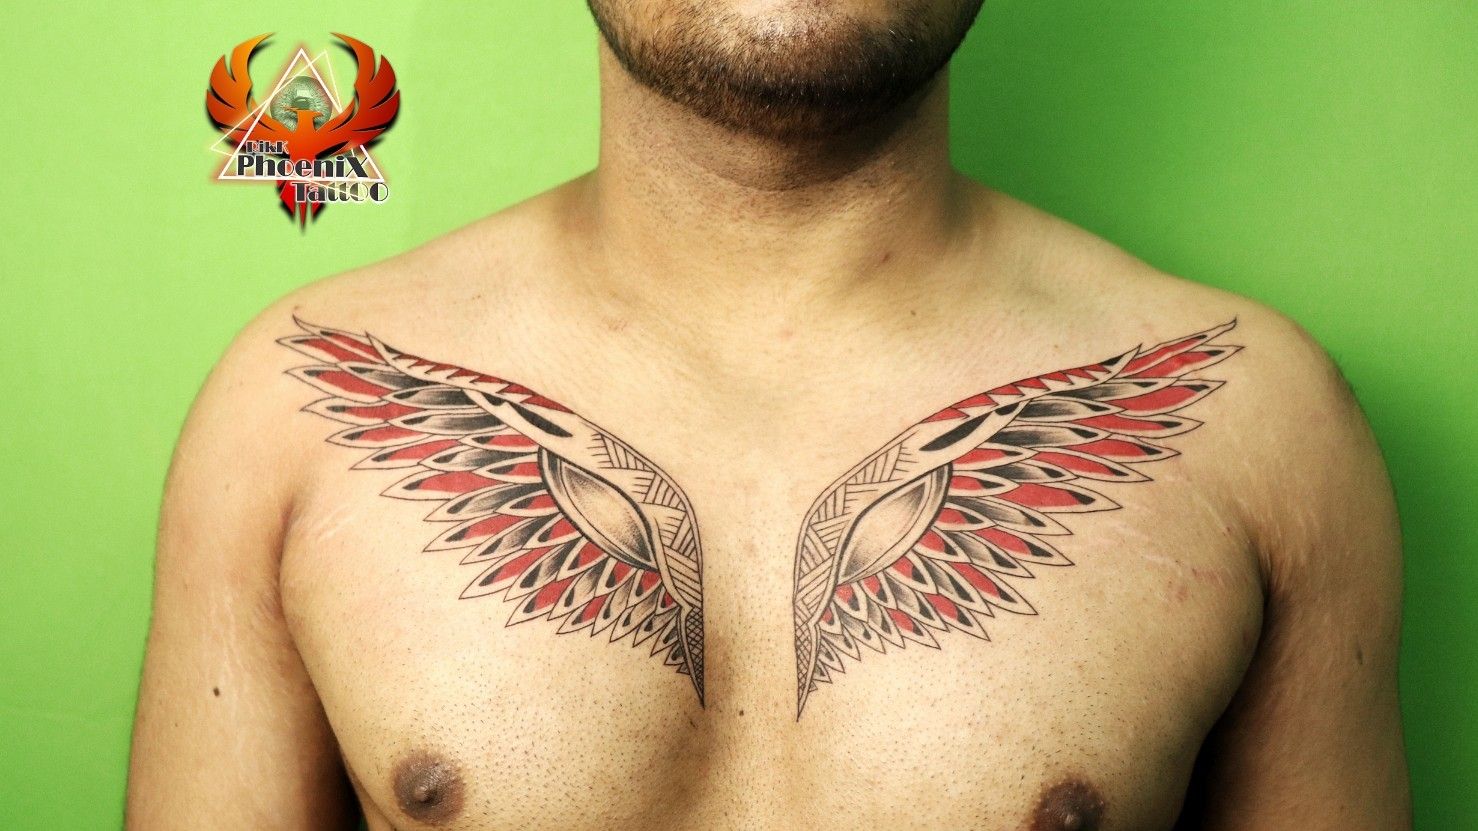 Tattoo uploaded by Cailleach Oidhche • sixth - cover up - done by keff # phoenix #wings #back #coverup • Tattoodo